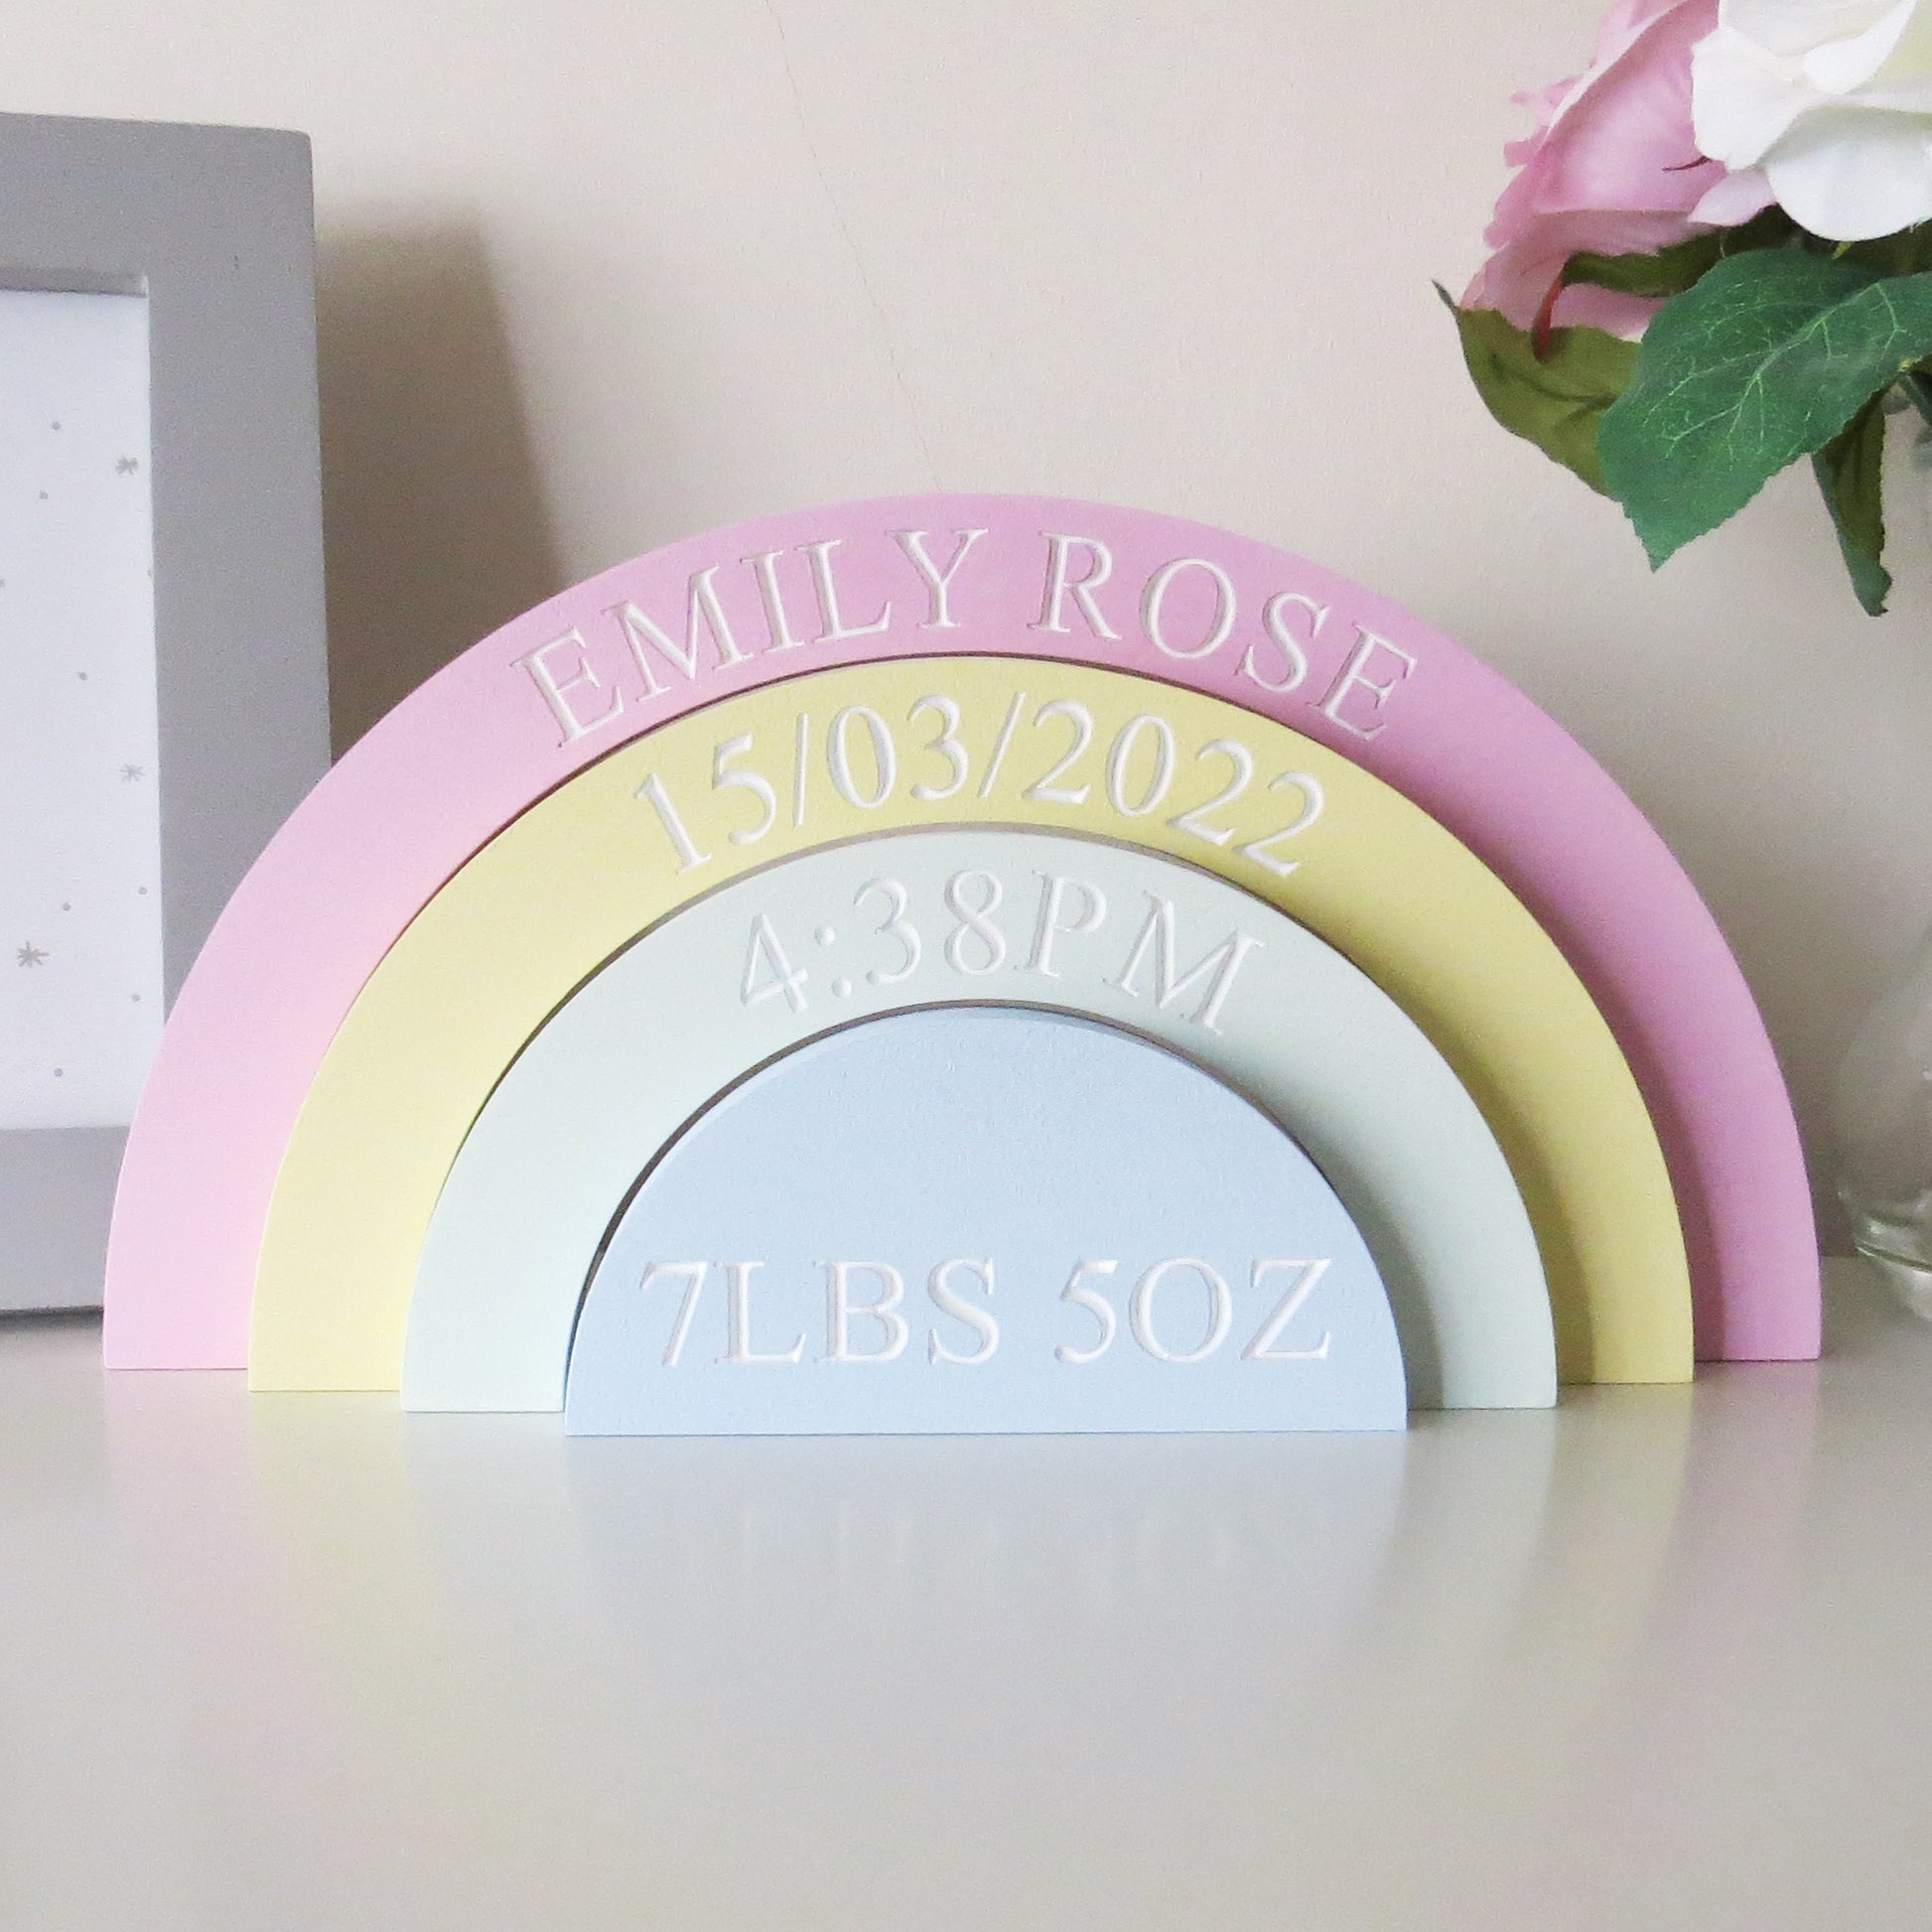 A childrens nurery rainbow shaped shelf stacker painted in pastel colours.